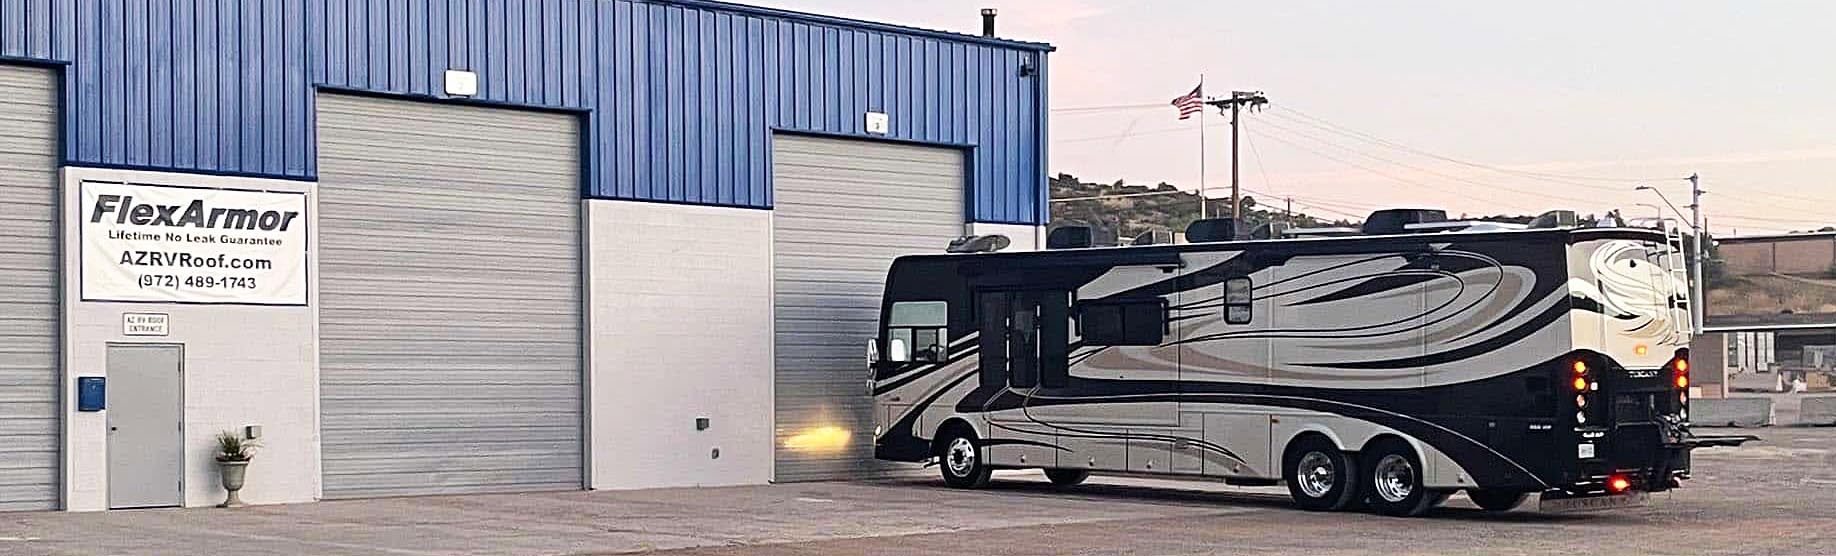 Class A RV parked outside AZ RV Roof